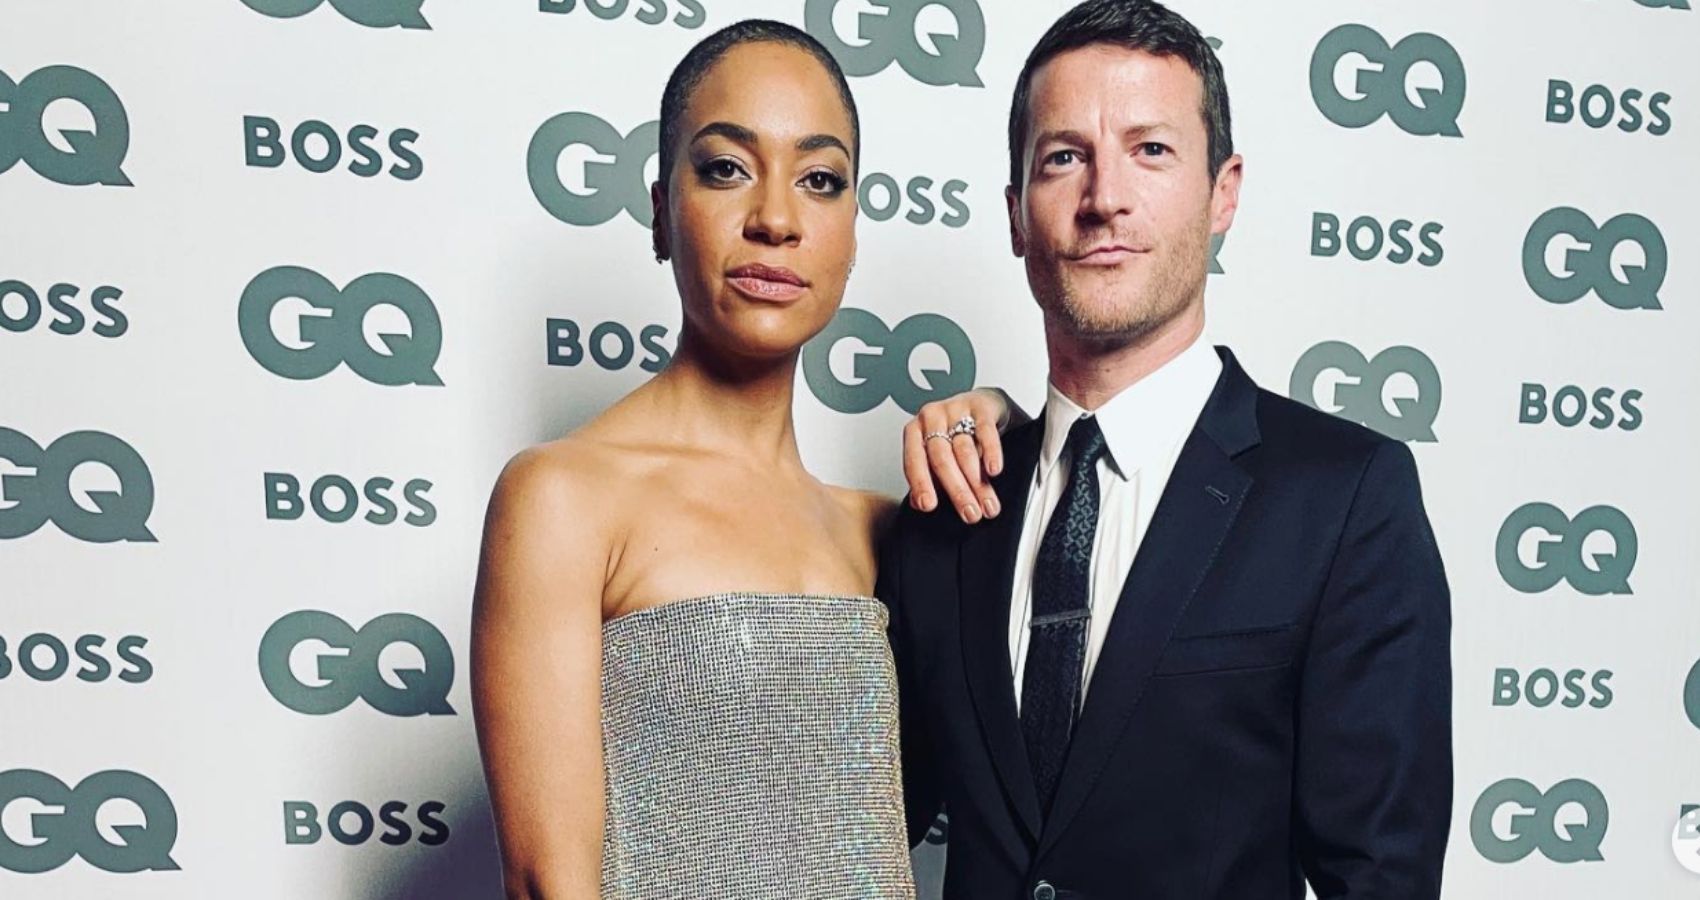 Cush Jumbo and her husband Sean Griffin pose at a GQ press event